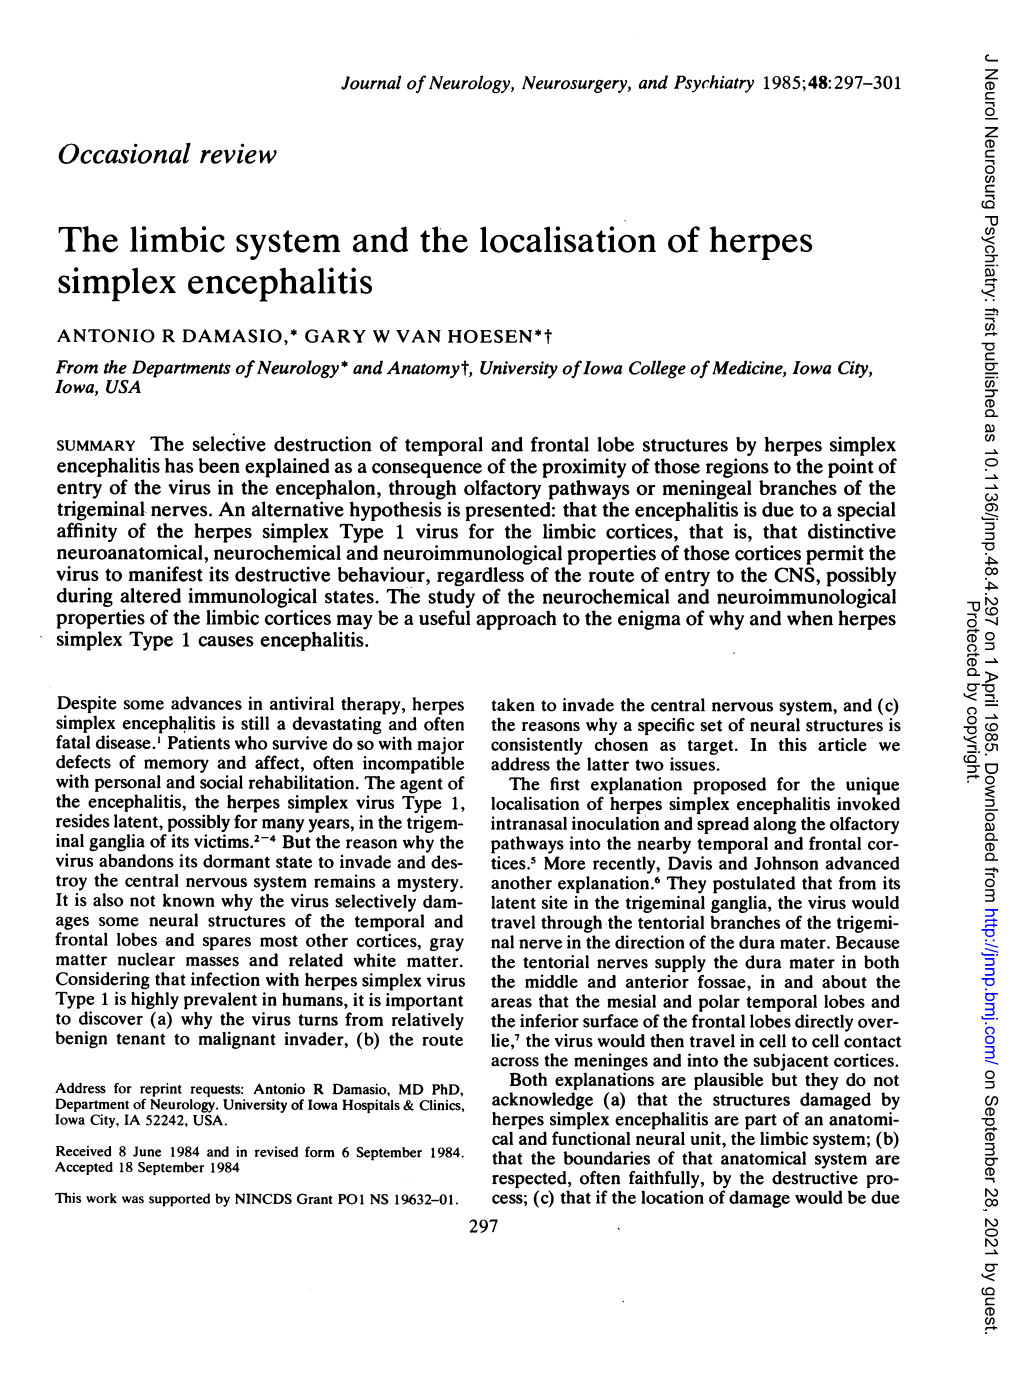 The Limbic System and the Localisation of Herpes Simplex Encephalitis